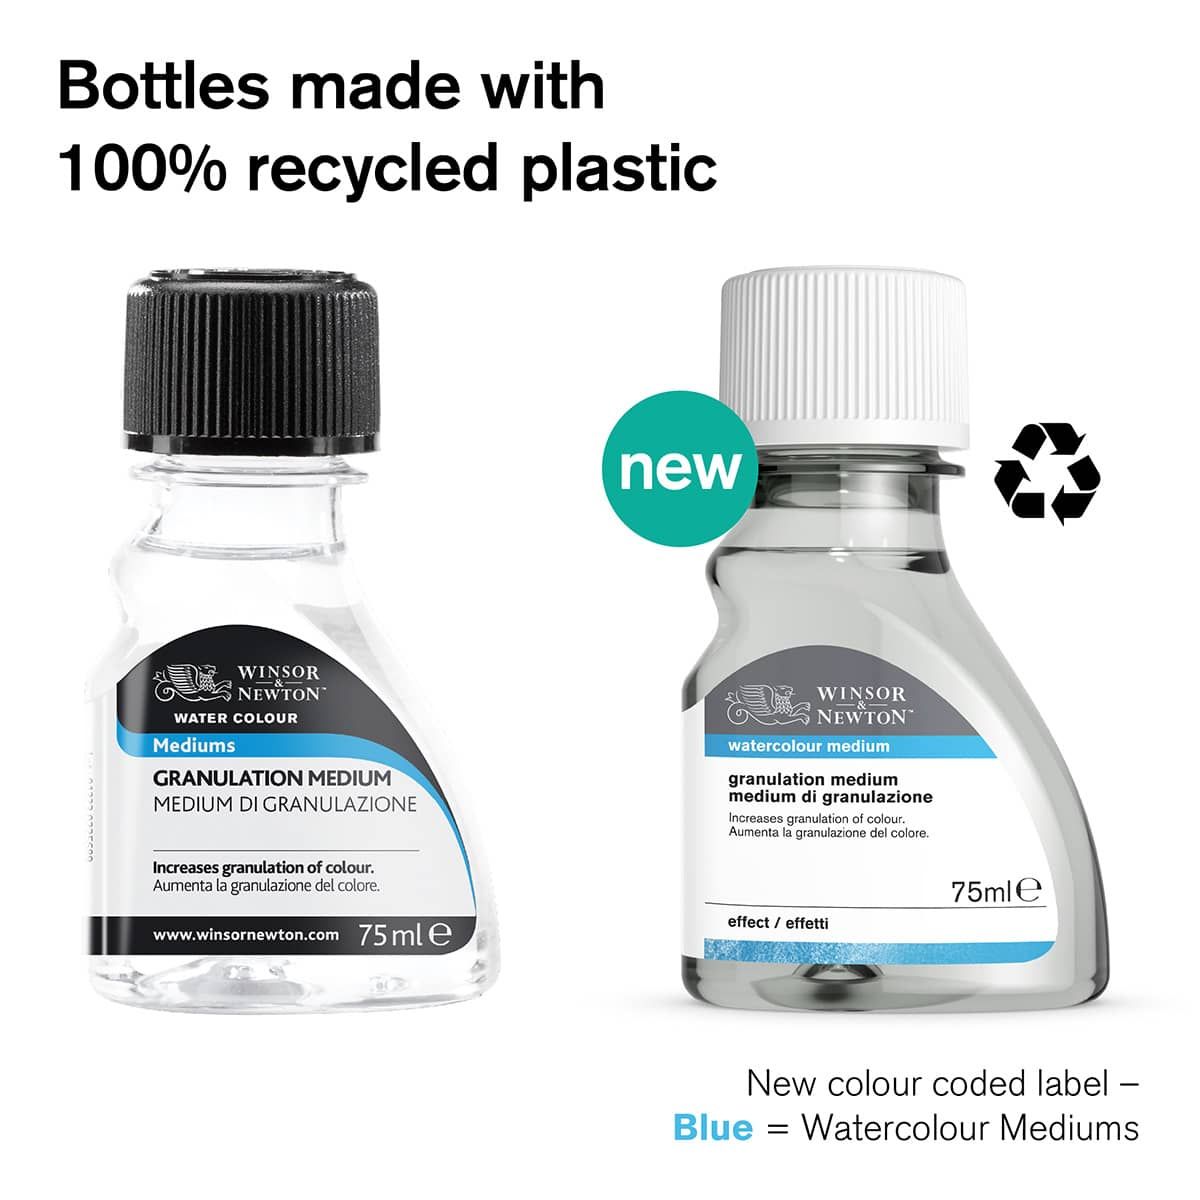 Bottles made with 100% recycled plastic